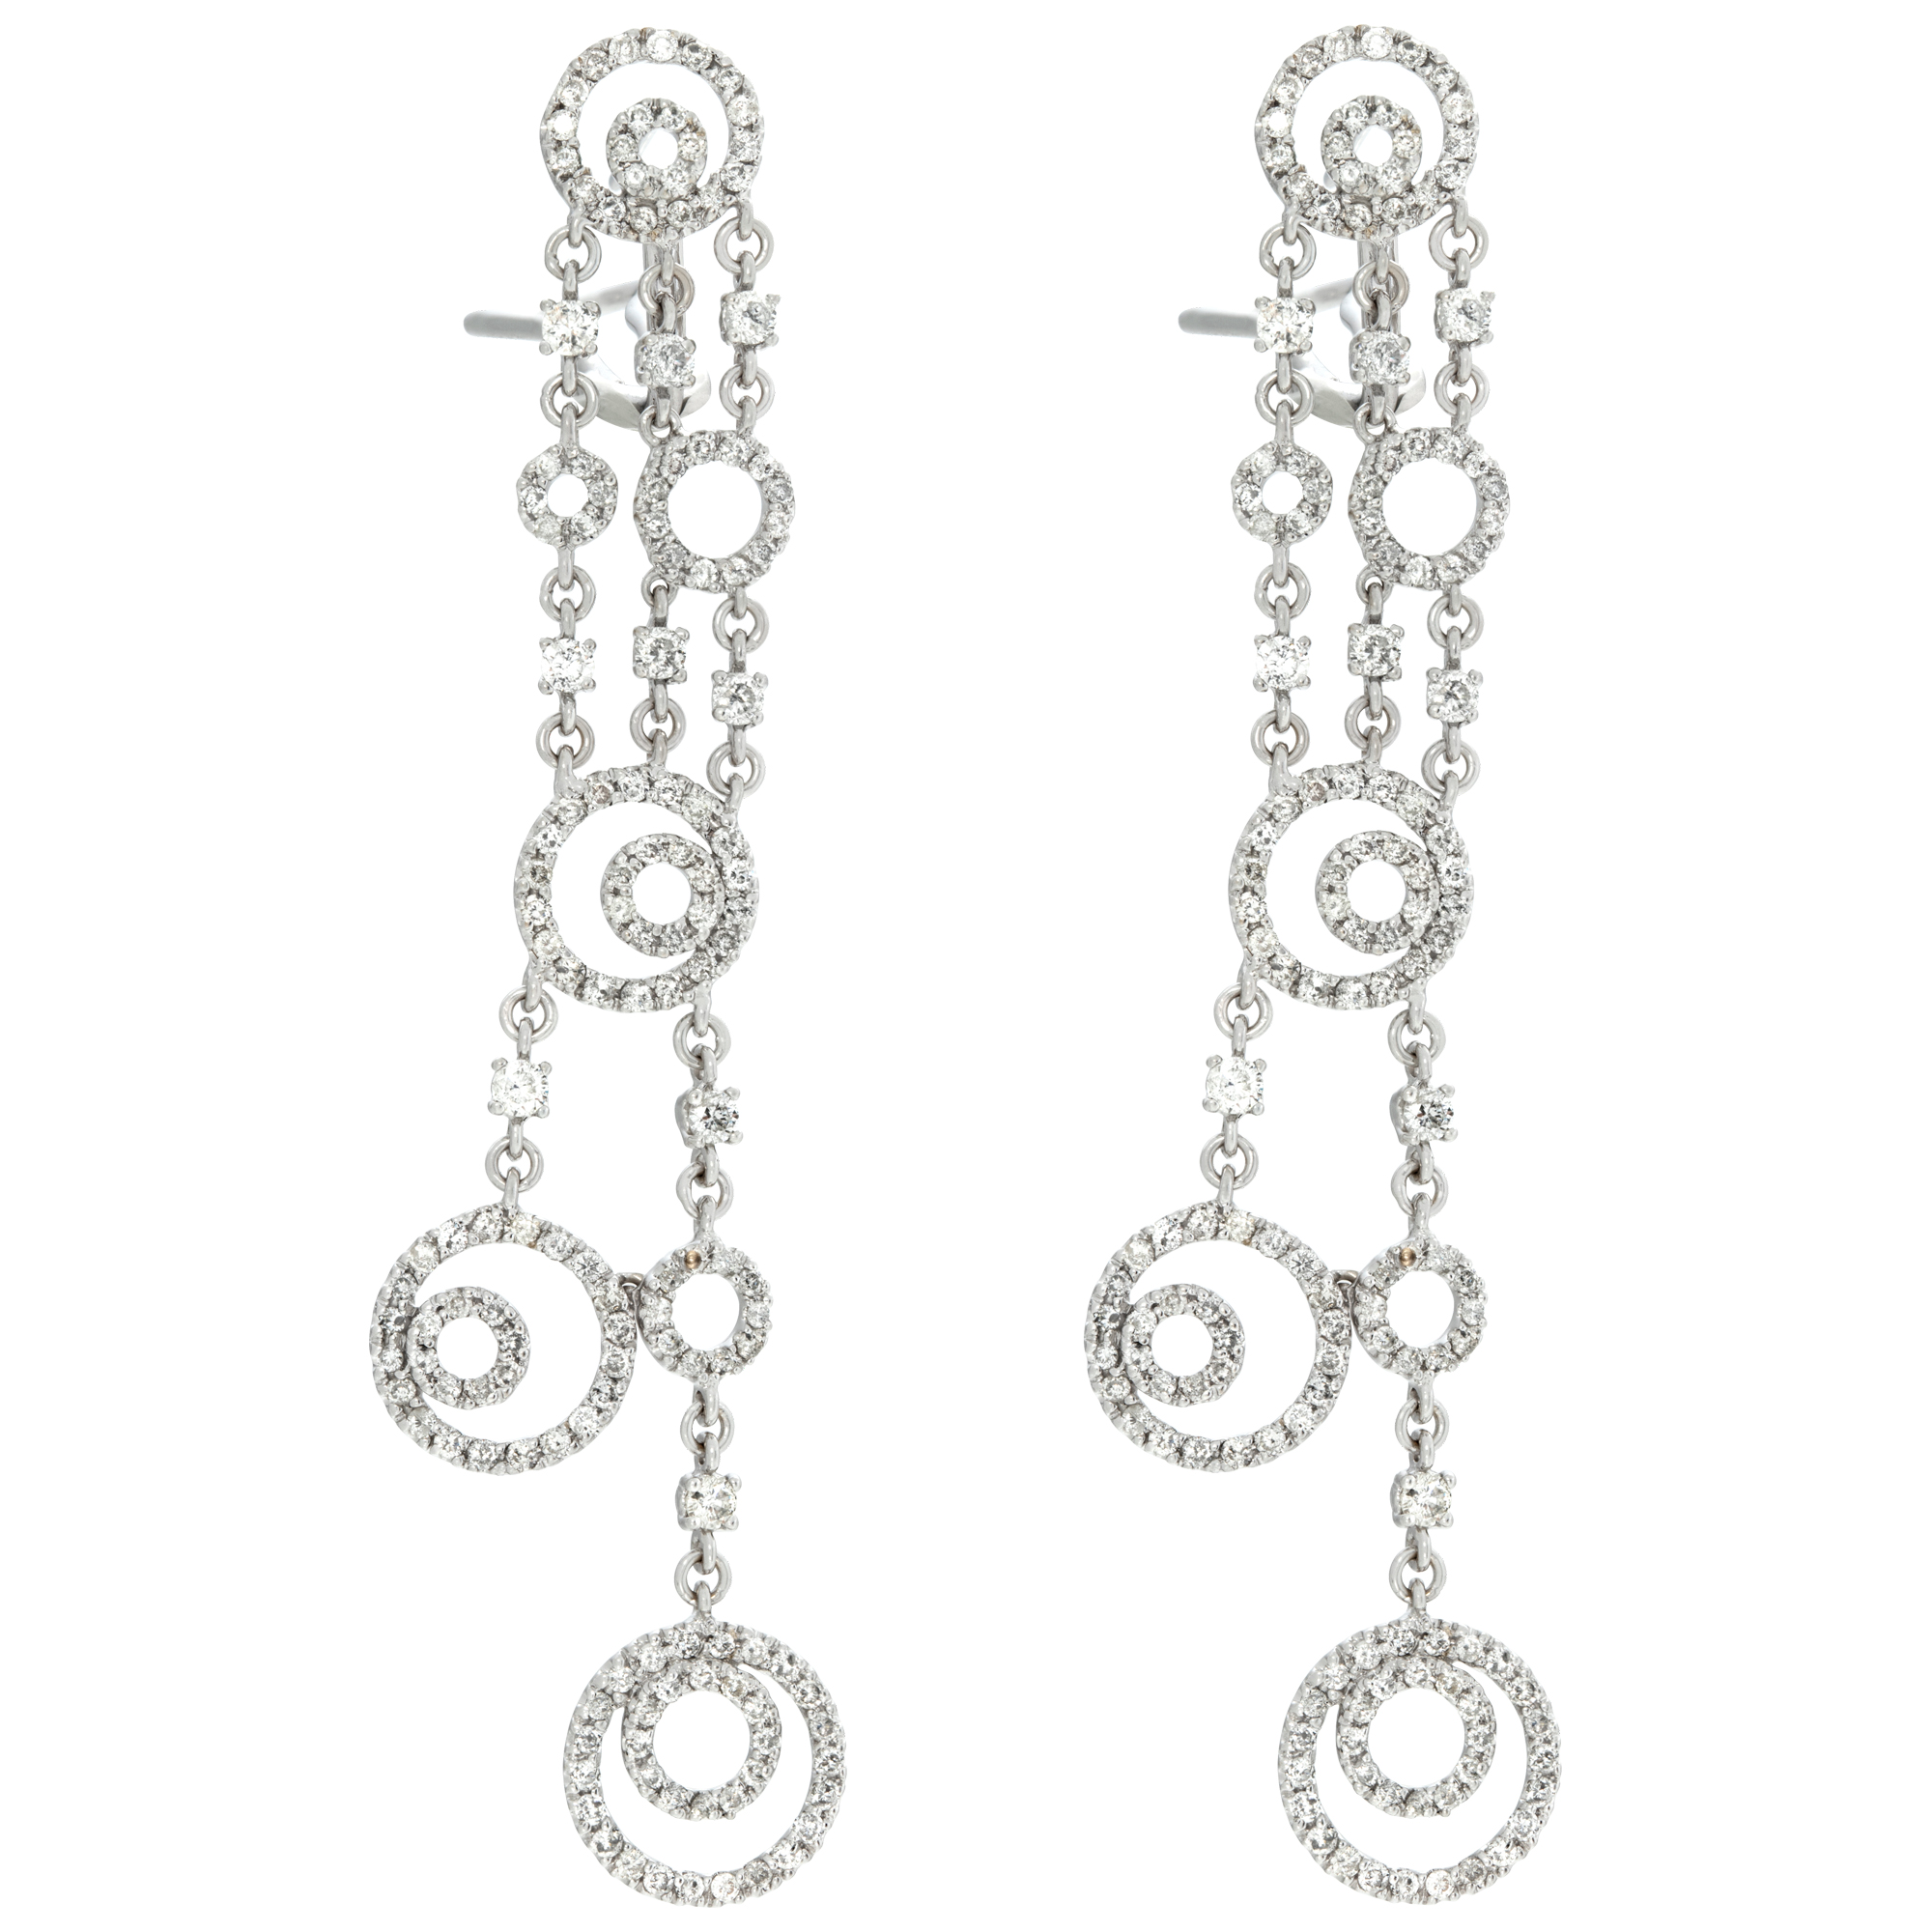 Diamond  bubble drop earrings in 18k white gold with 2.50 carats